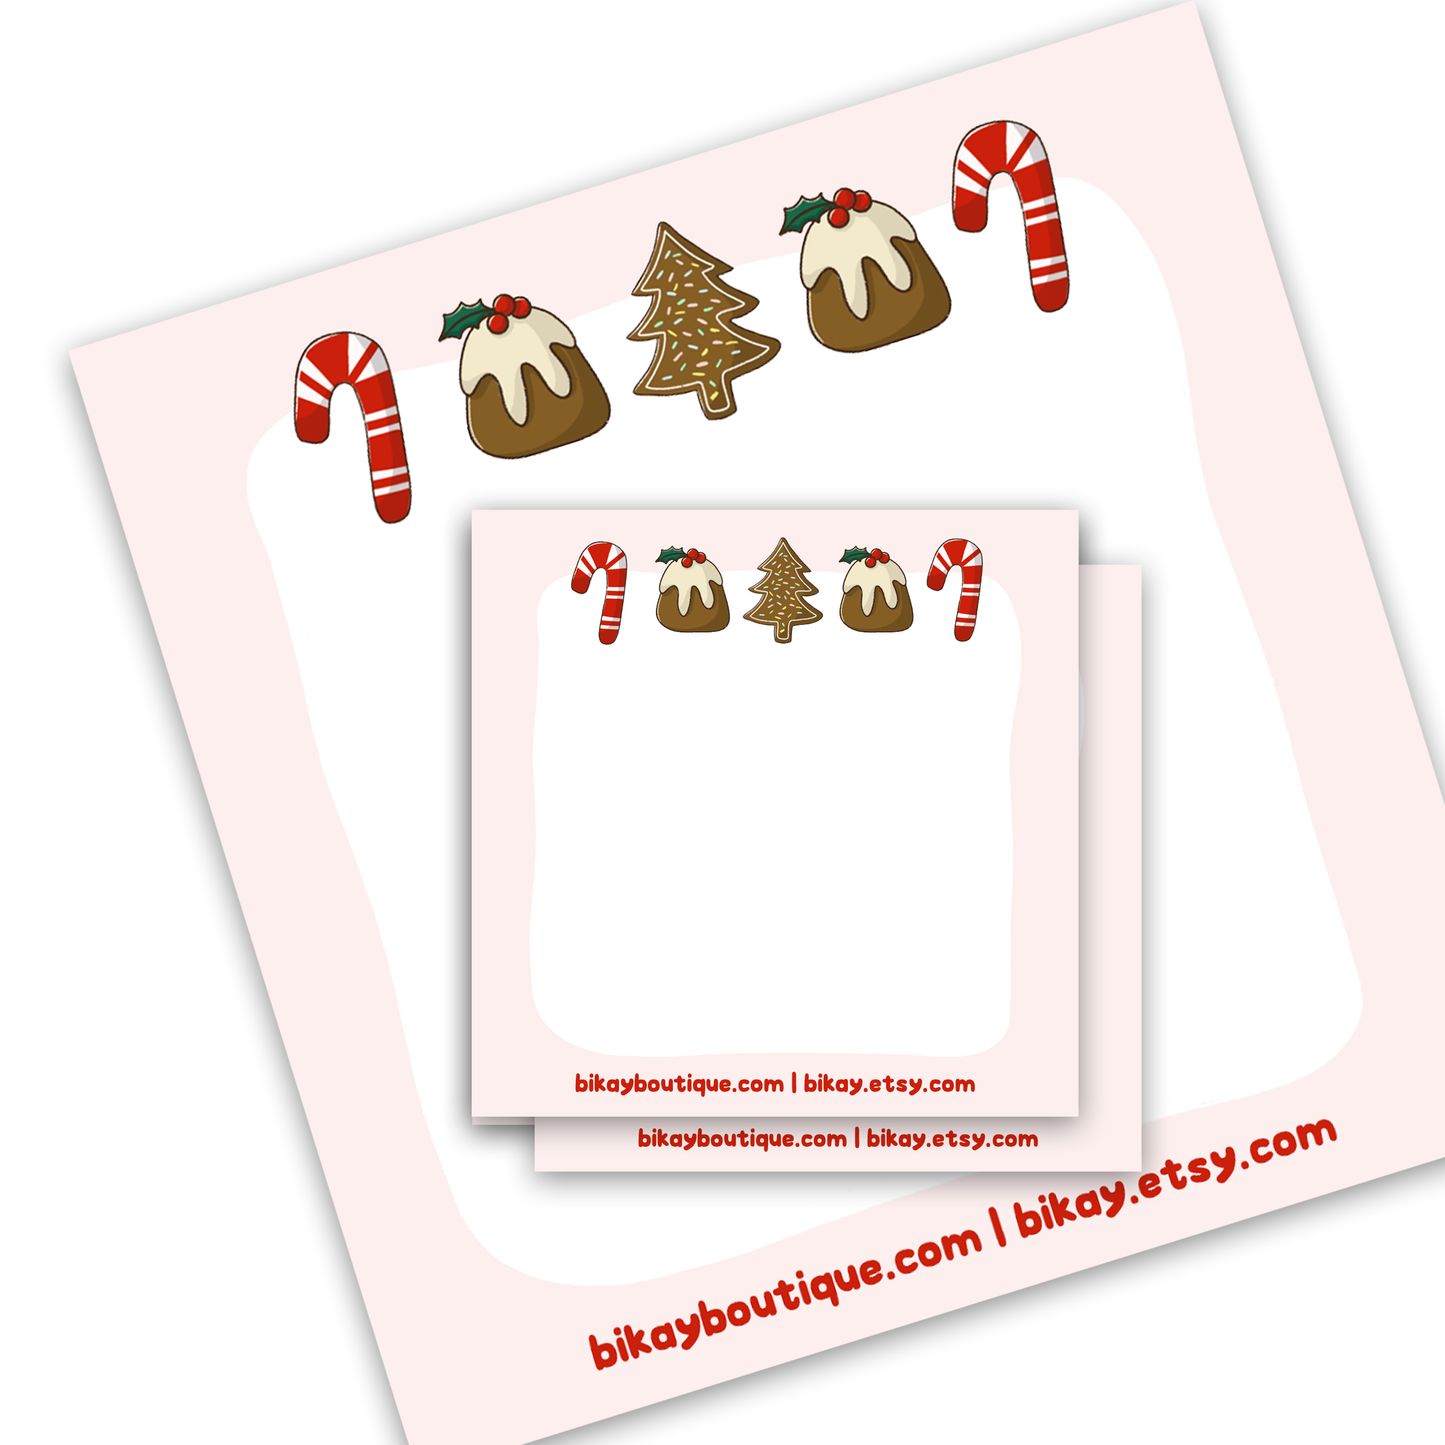 Christmas Sweets Note Pad 3.5"x3.5"